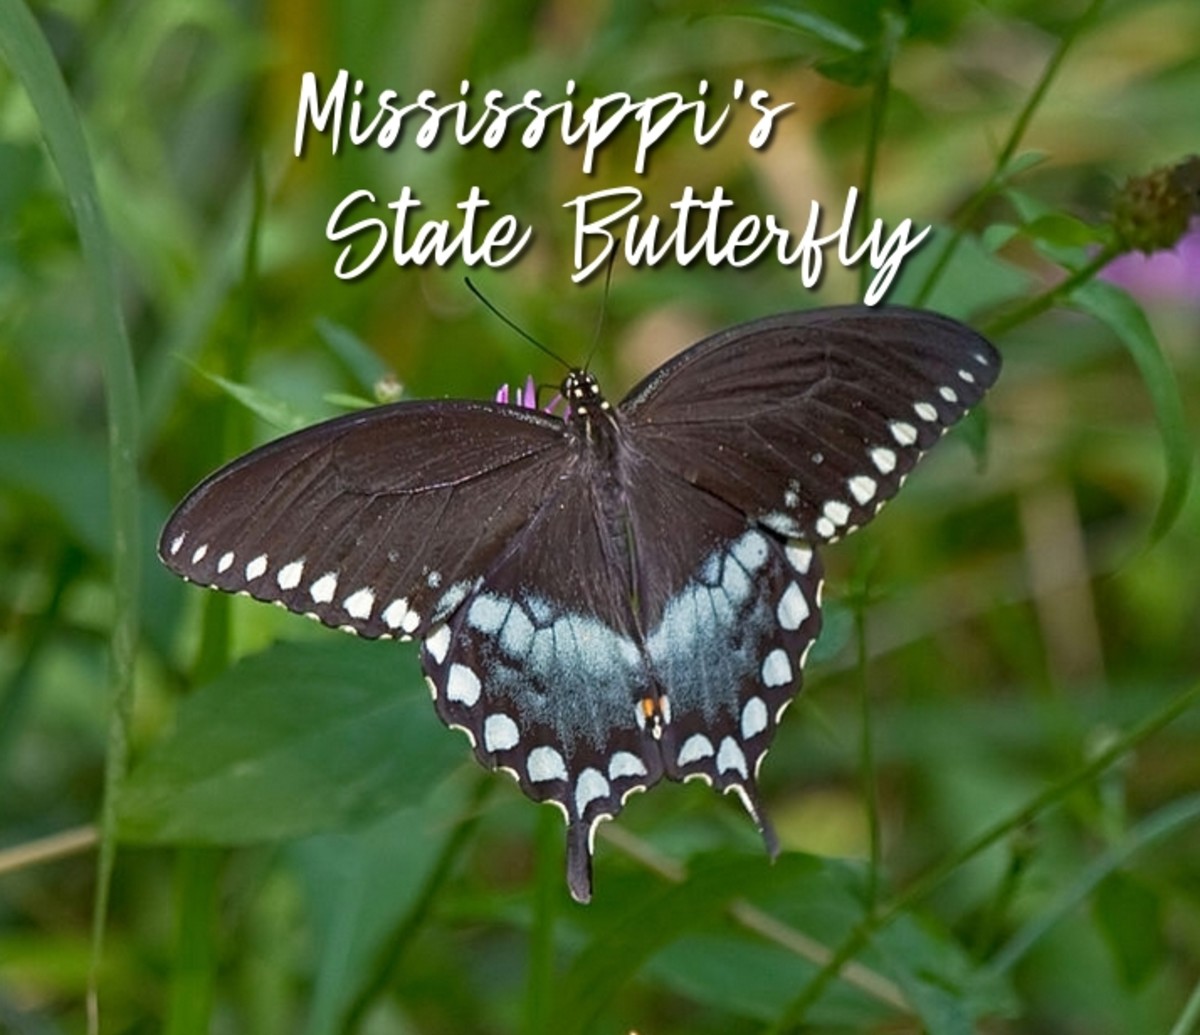 Mississippi's State Butterfly, the gorgeous spicebush swallowtail